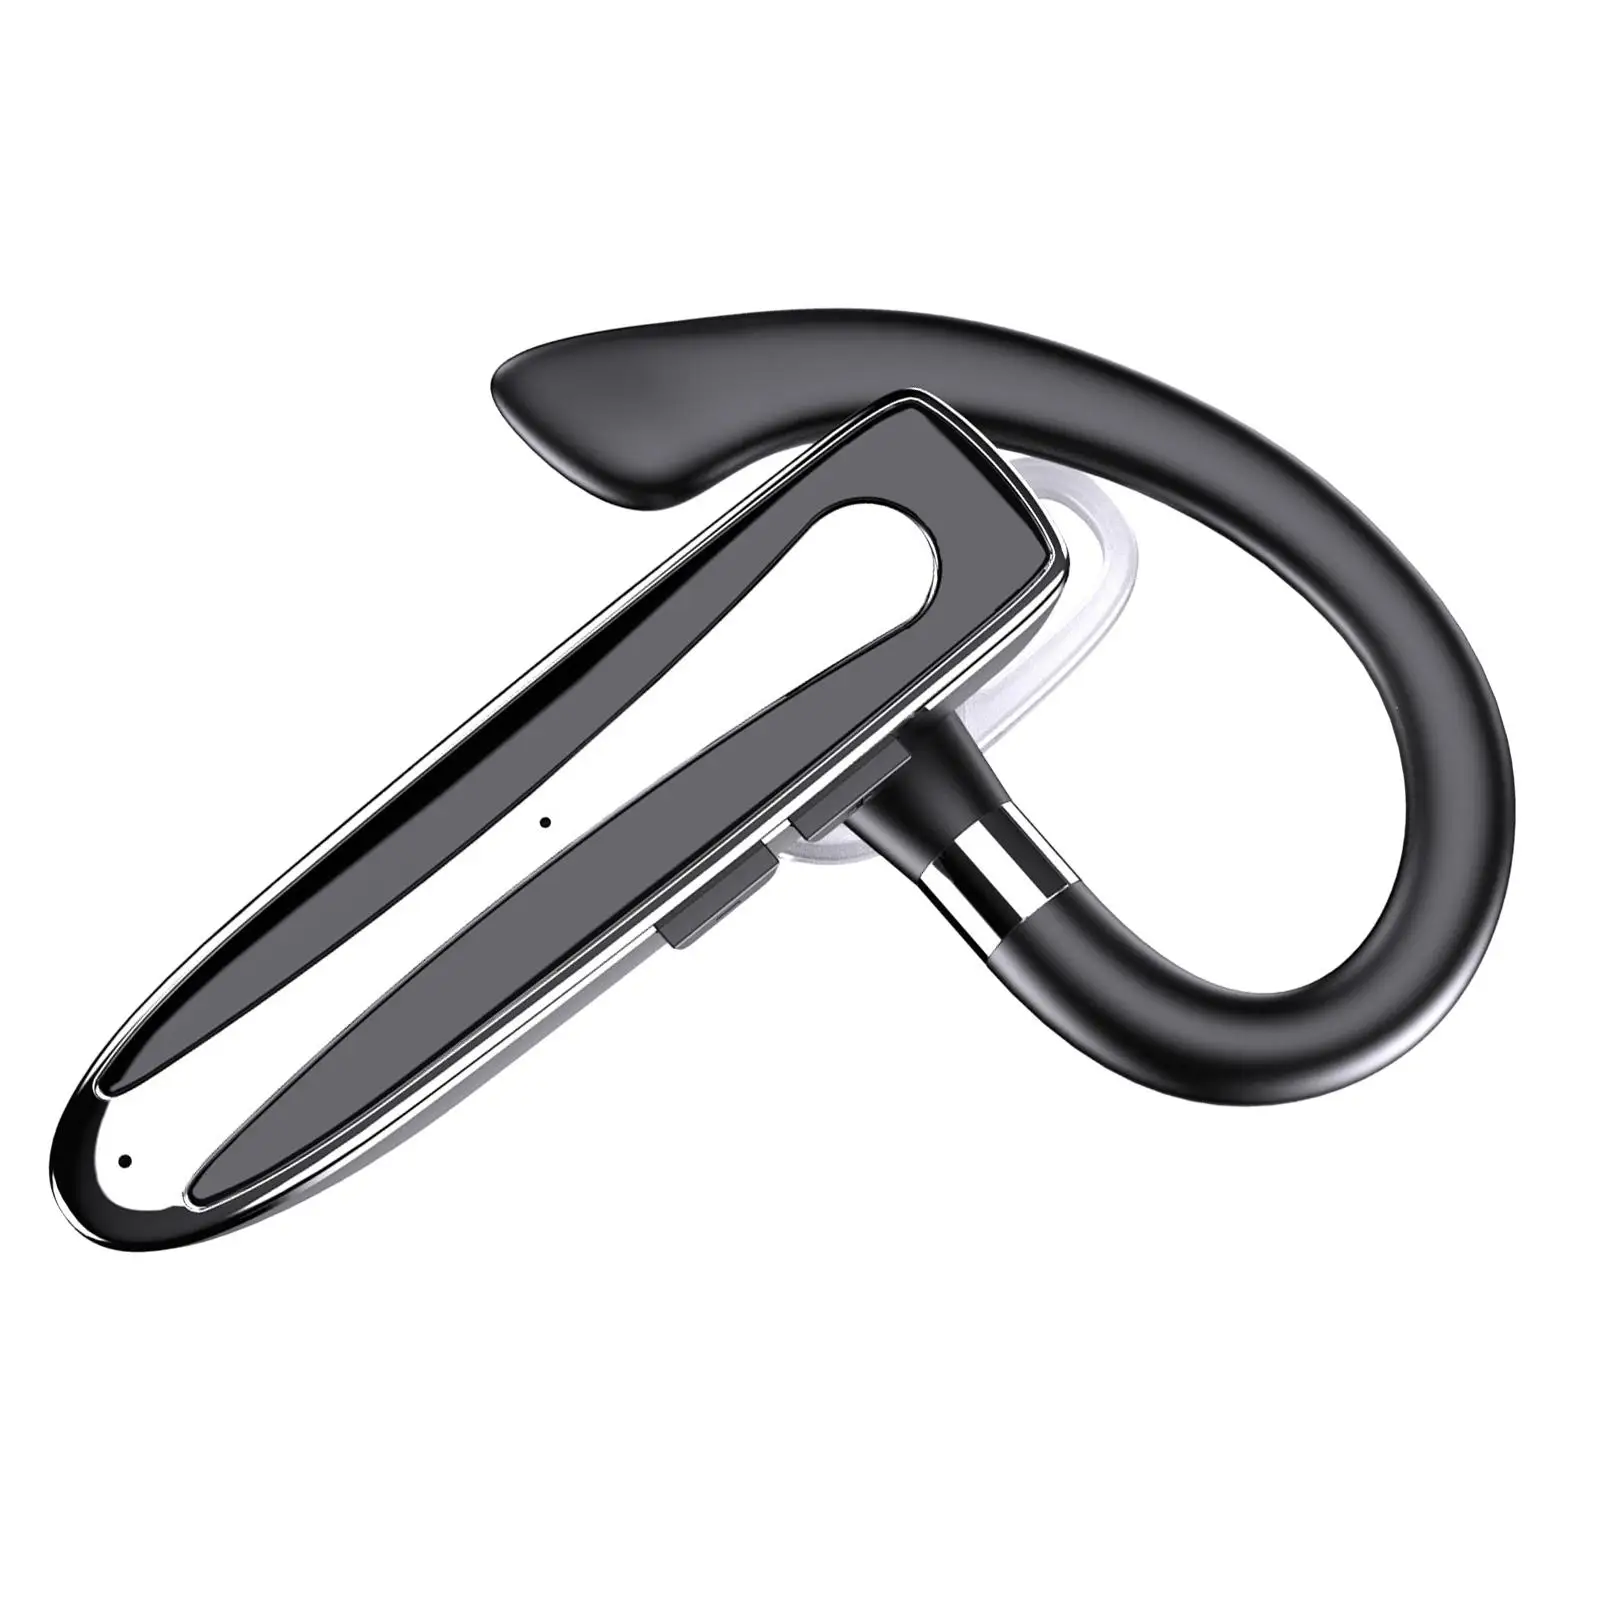 Portable Single Ear Hook Earphone 360 Degrees Rotating Noise Cancelling Handsfree Earbud for Cycling Fitness Office Video Audio